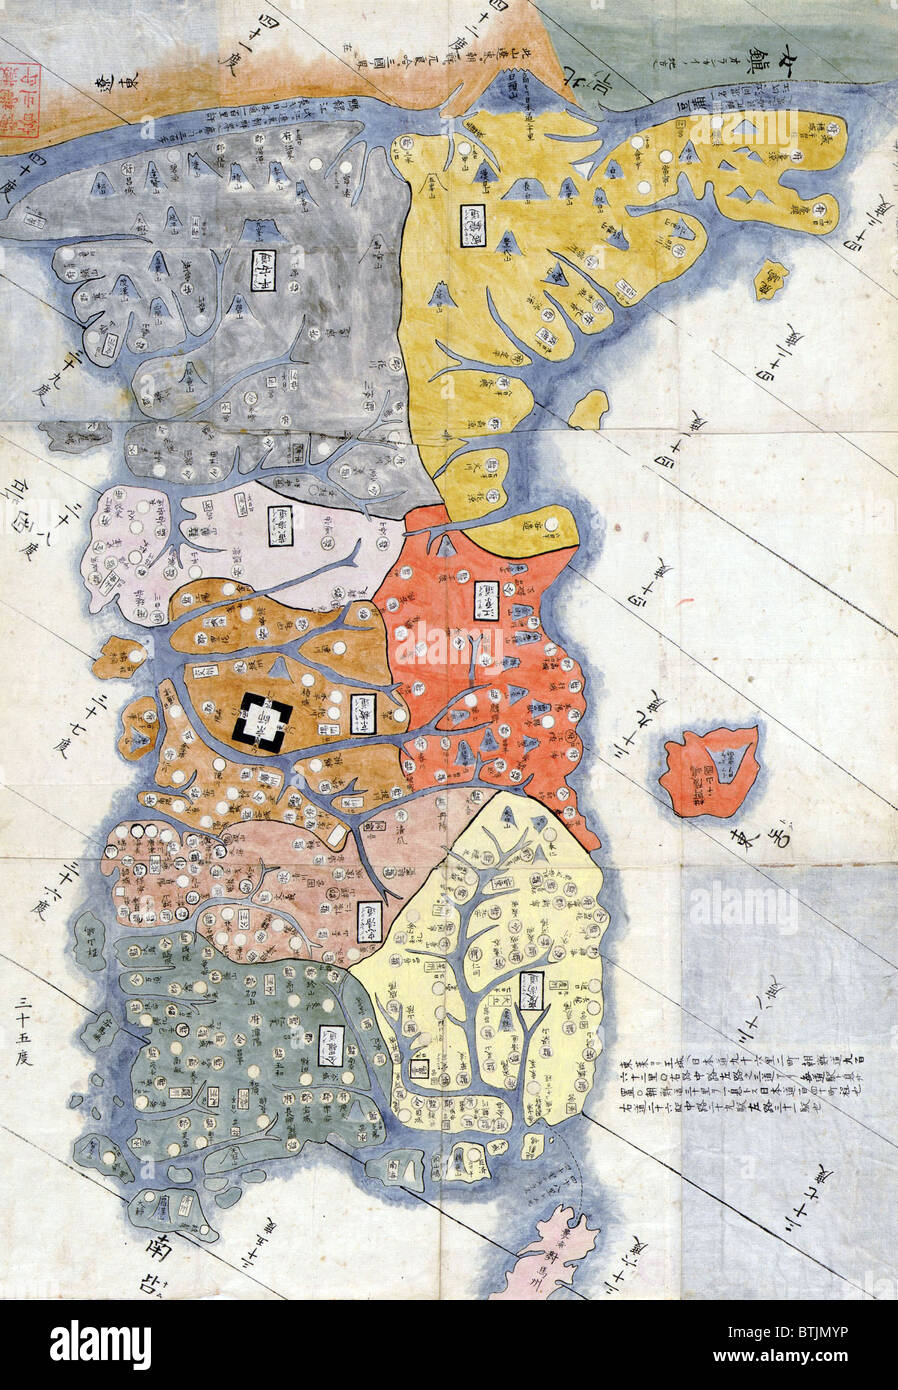 1785 map of Korea by Hayashi Shihei, a Japanese scholar and specialist in military affairs. Korean national identity has survived many invasions by its powerful neighbors, Japan and China. Stock Photo